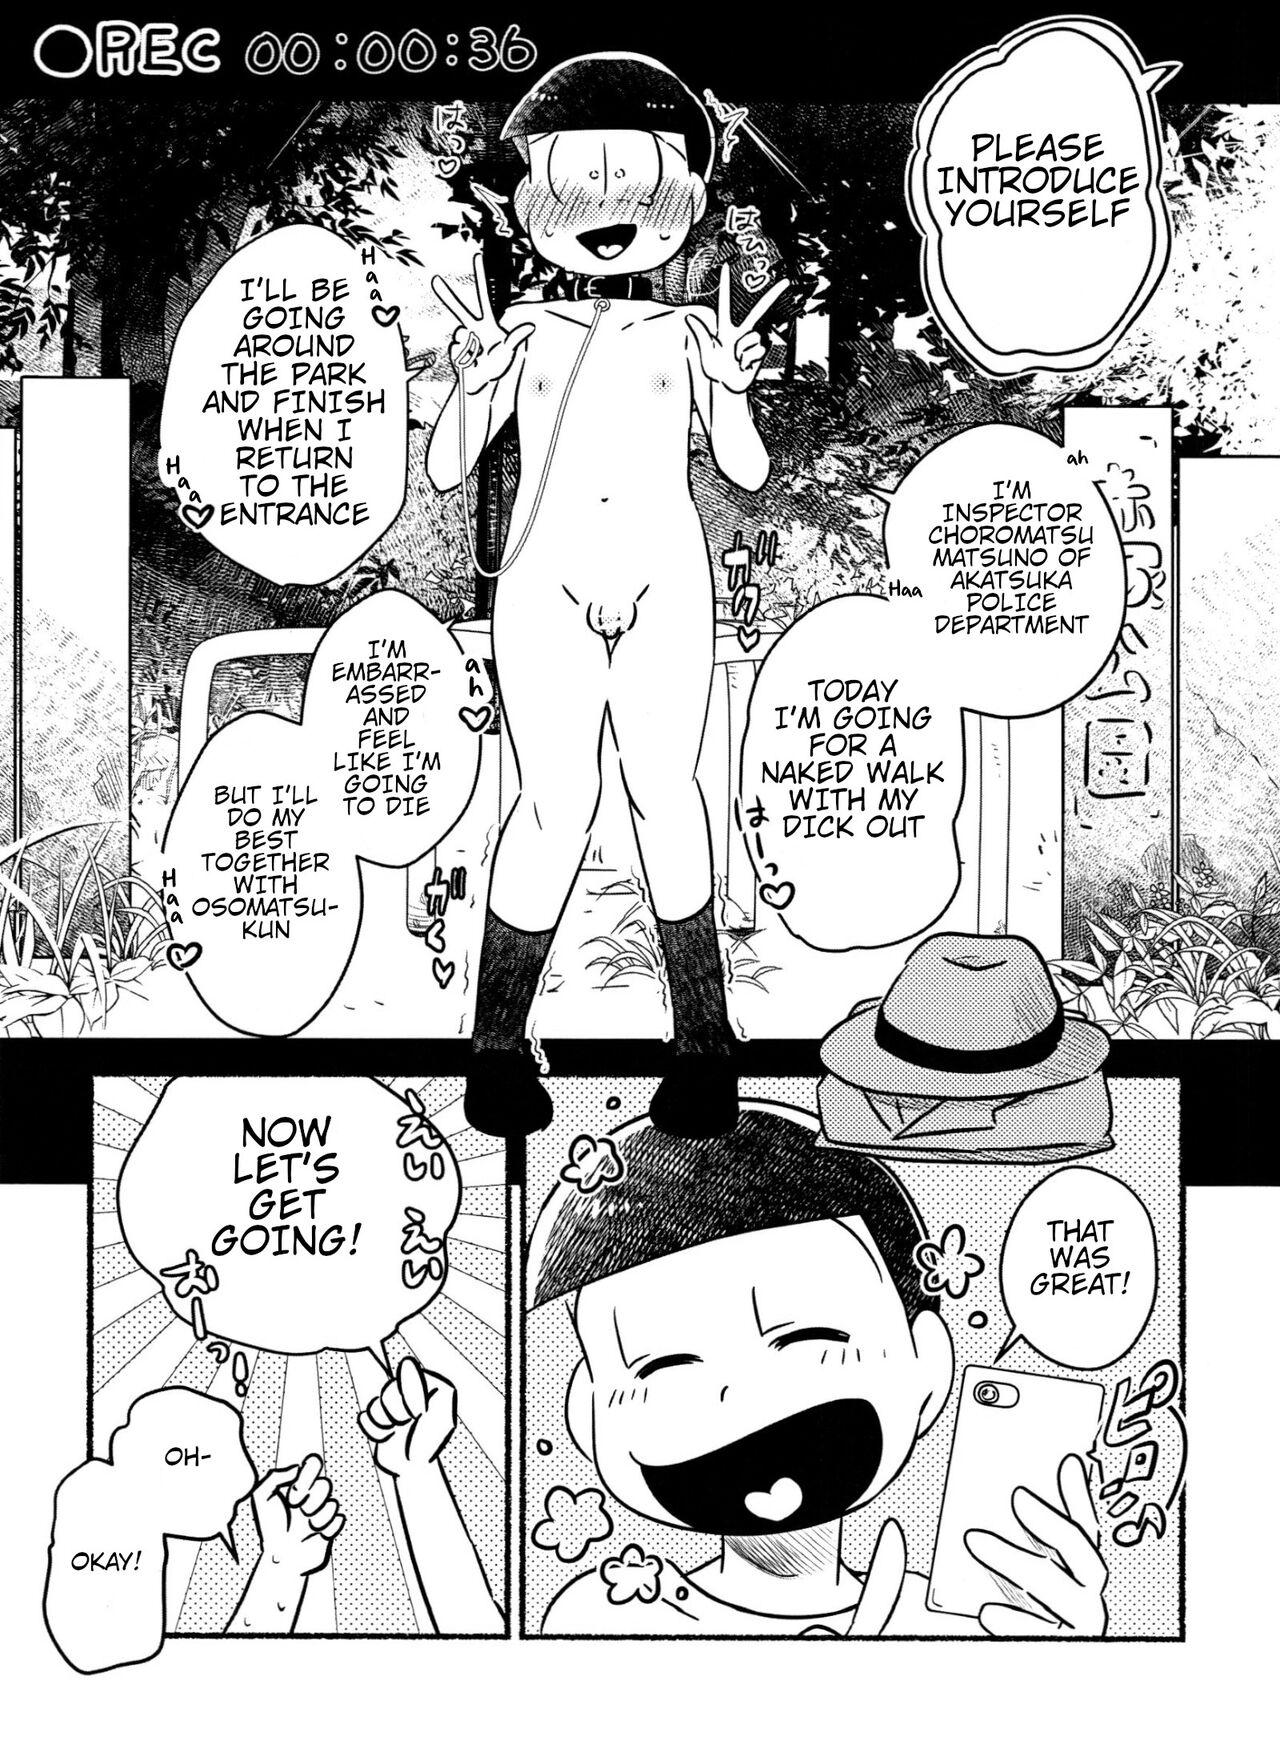 Adult Inspector Choromatsu walks naked at night and does XXX in the public eye R18 book - Osomatsu san Seduction Porn - Page 8